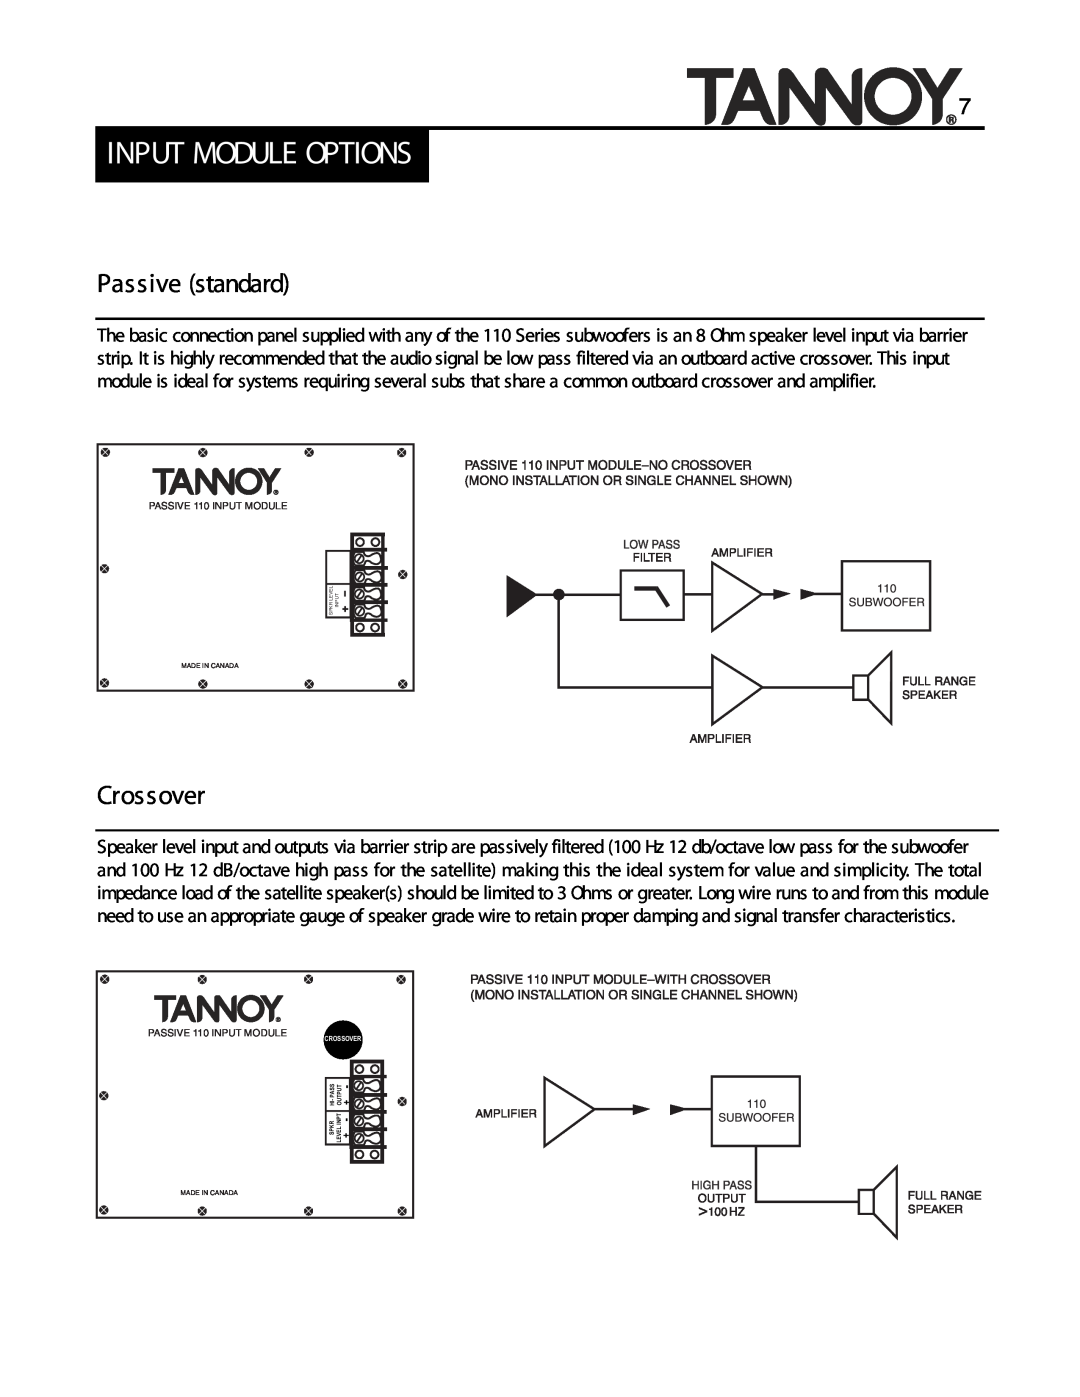 Tannoy SUBWOOFERS manual Input Module Options, Passive standard, Crossover 